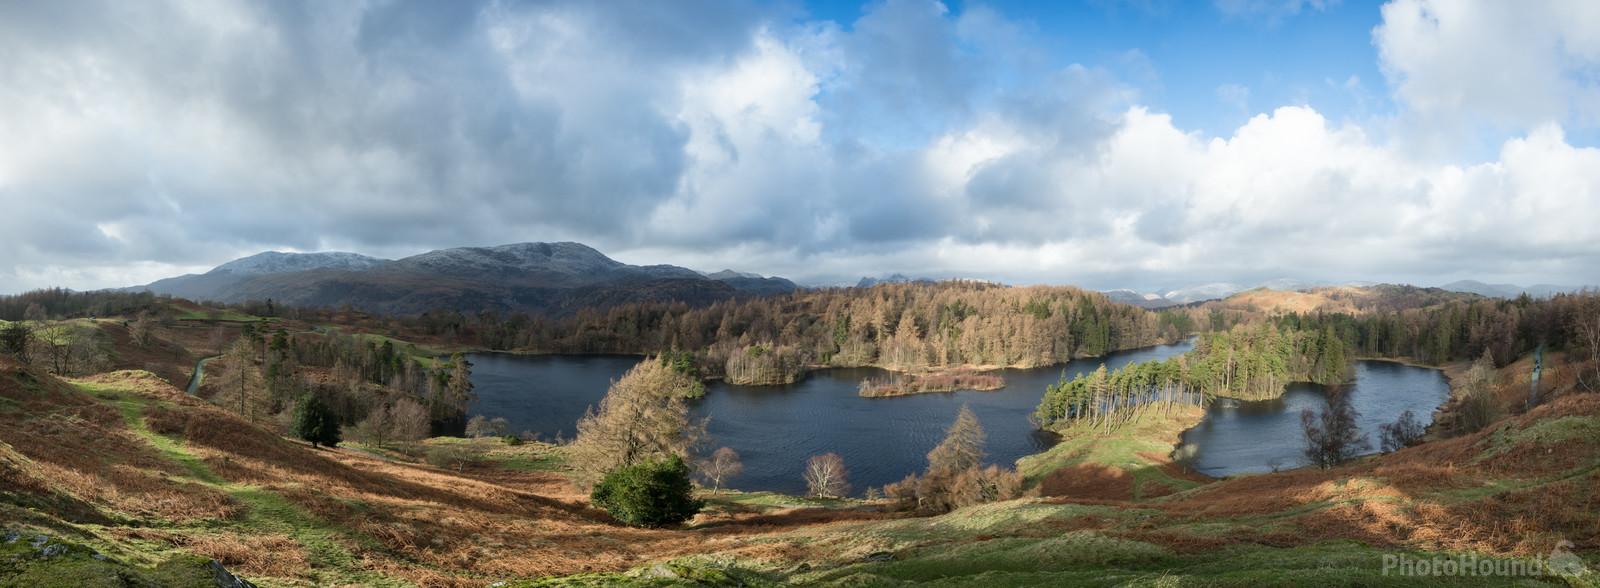 Image of Tarn Hows, Lake District by Richard Lizzimore